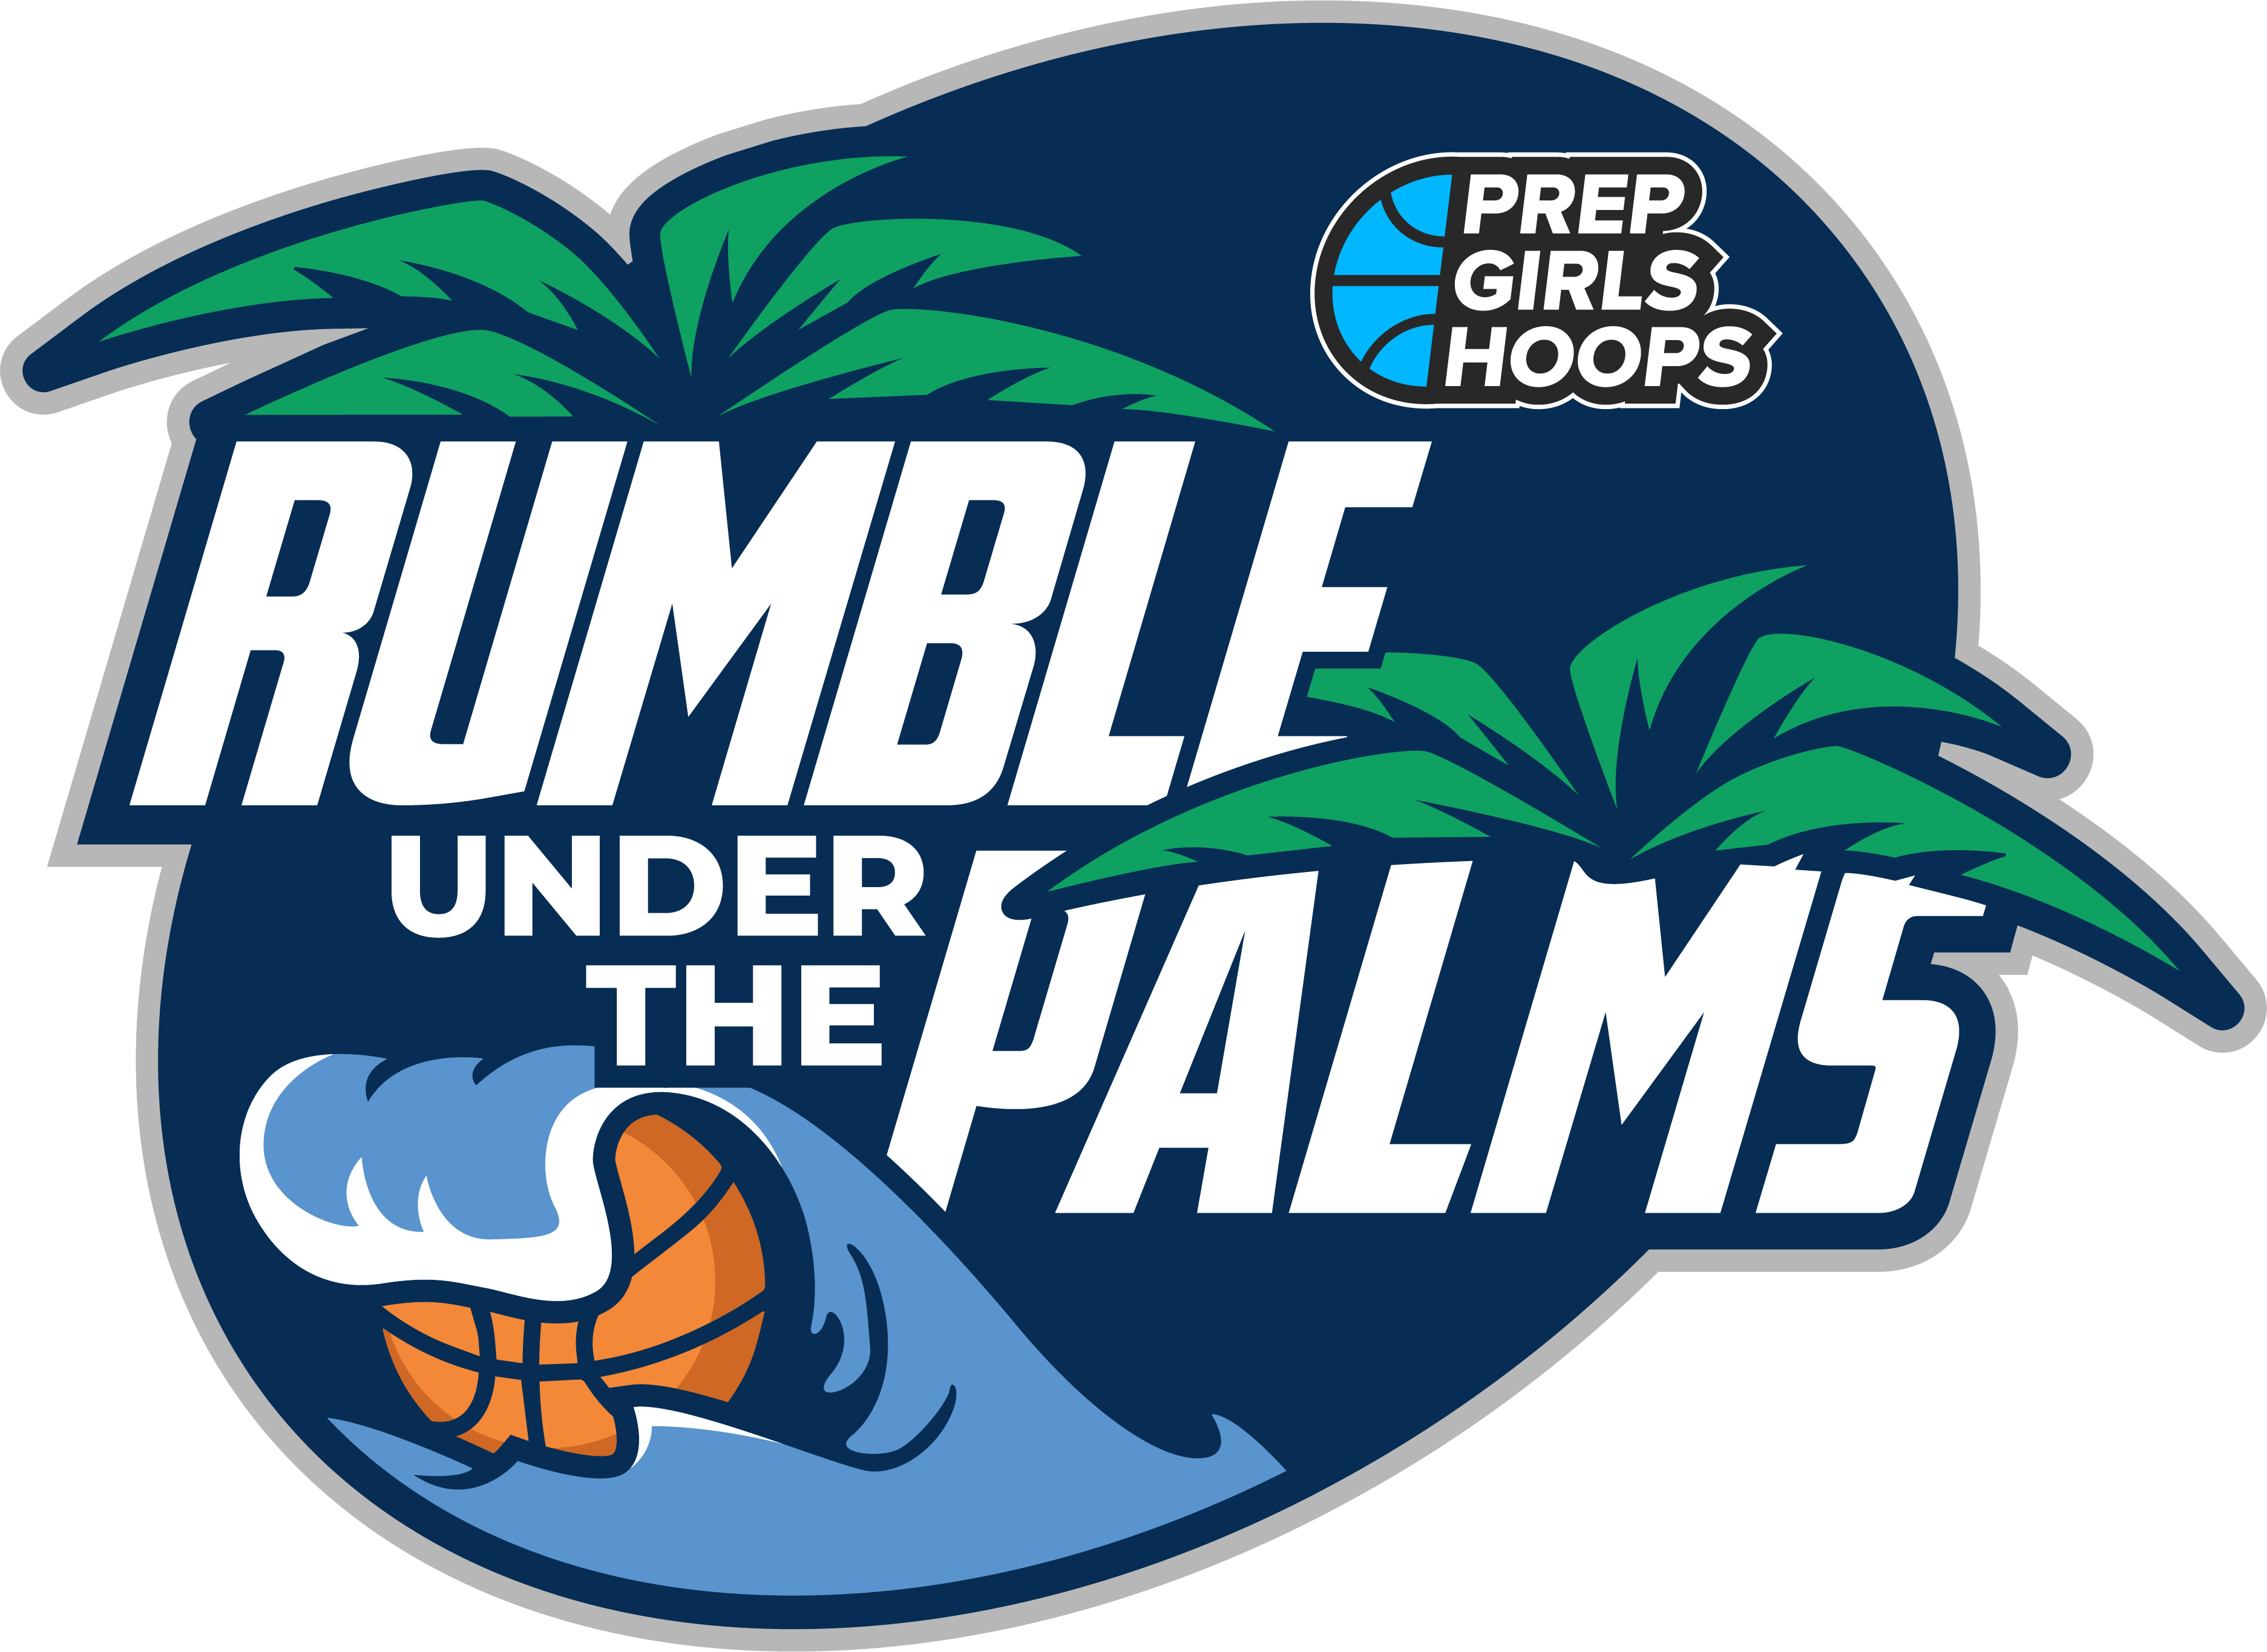 Rumble Under the Palms